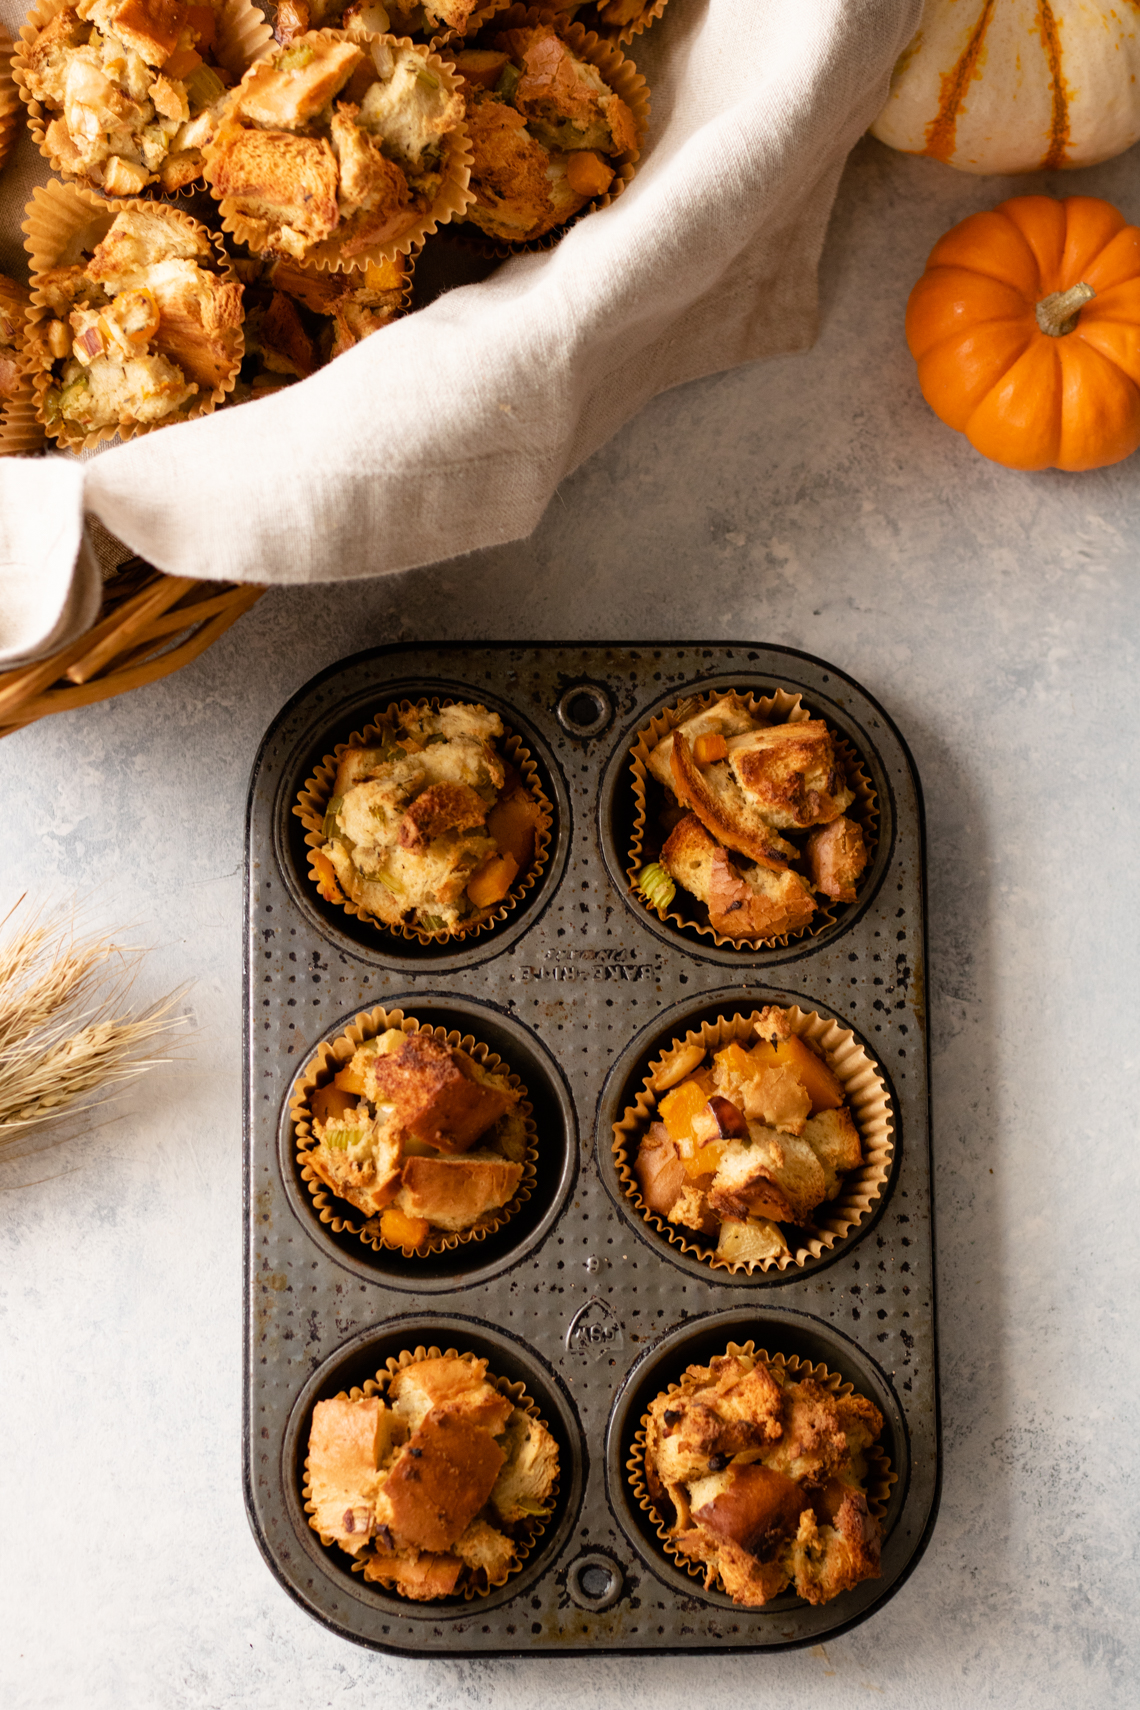 Let us take the stress out of your holiday dinner menu with this simple, portable side dish recipe! These Butternut Sausage Stuffing Muffins are perfect for an office potluck, family gathering, or Friendsgiving.